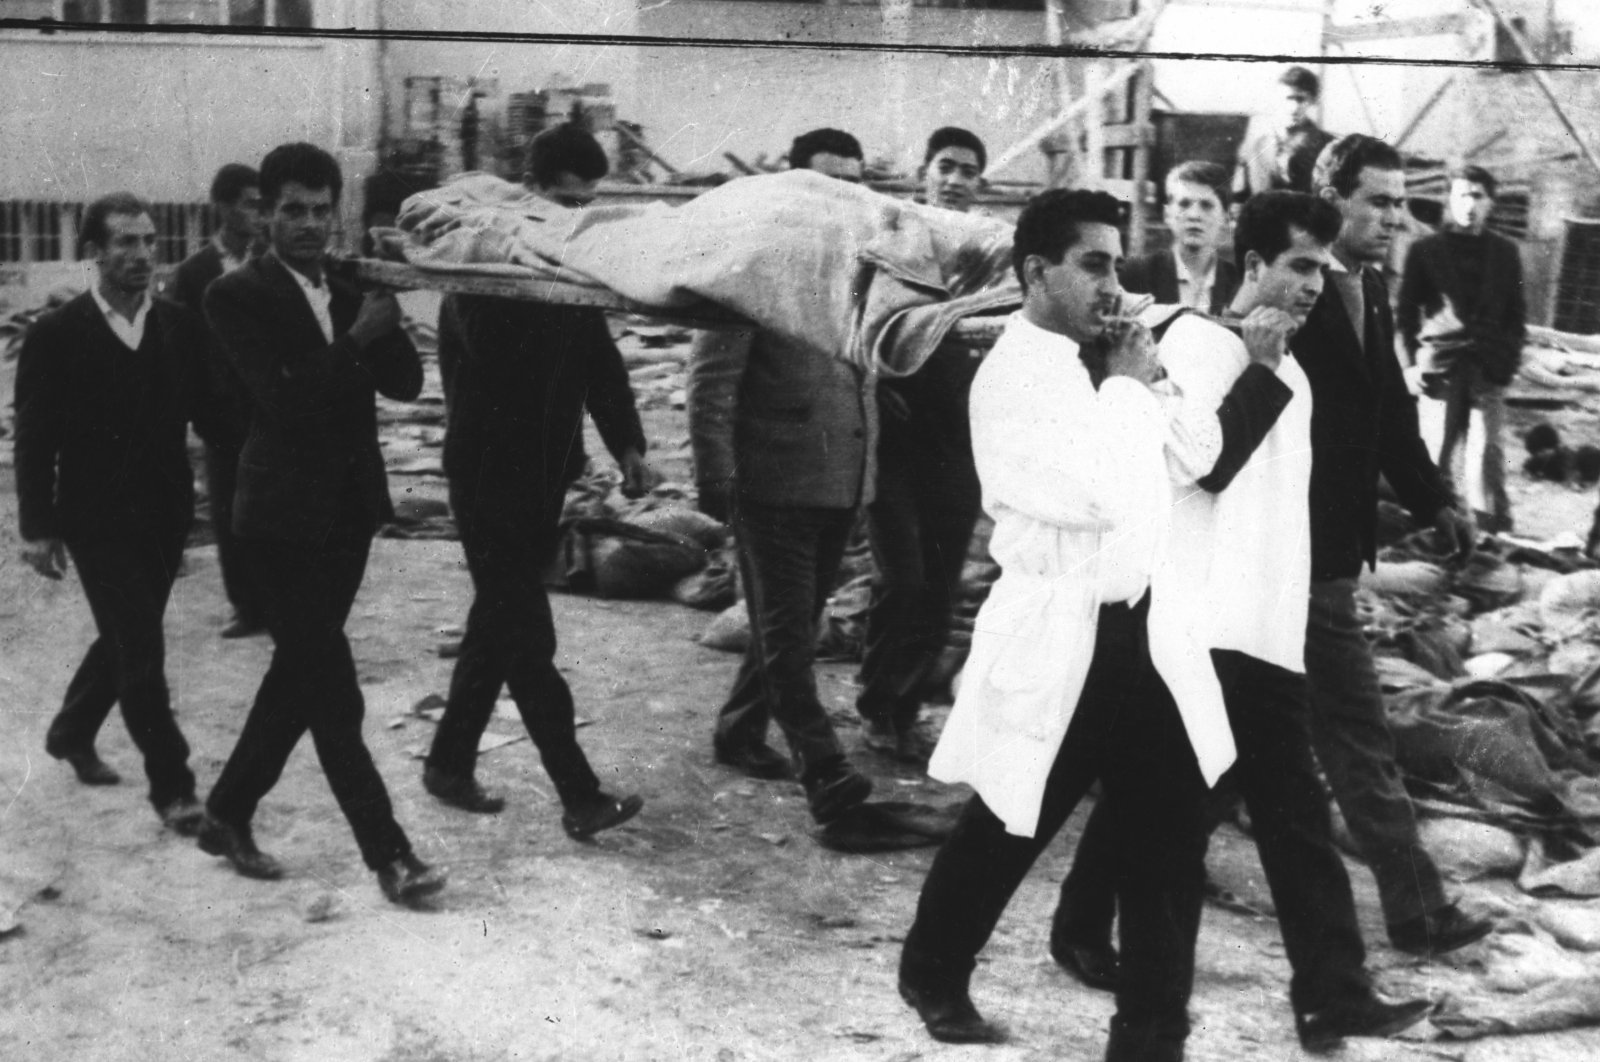 Turkish Cypriots carry the dead body of a victim who was killed by Greek Cypriot EOKA terrorists during the "Bloody Christmas."